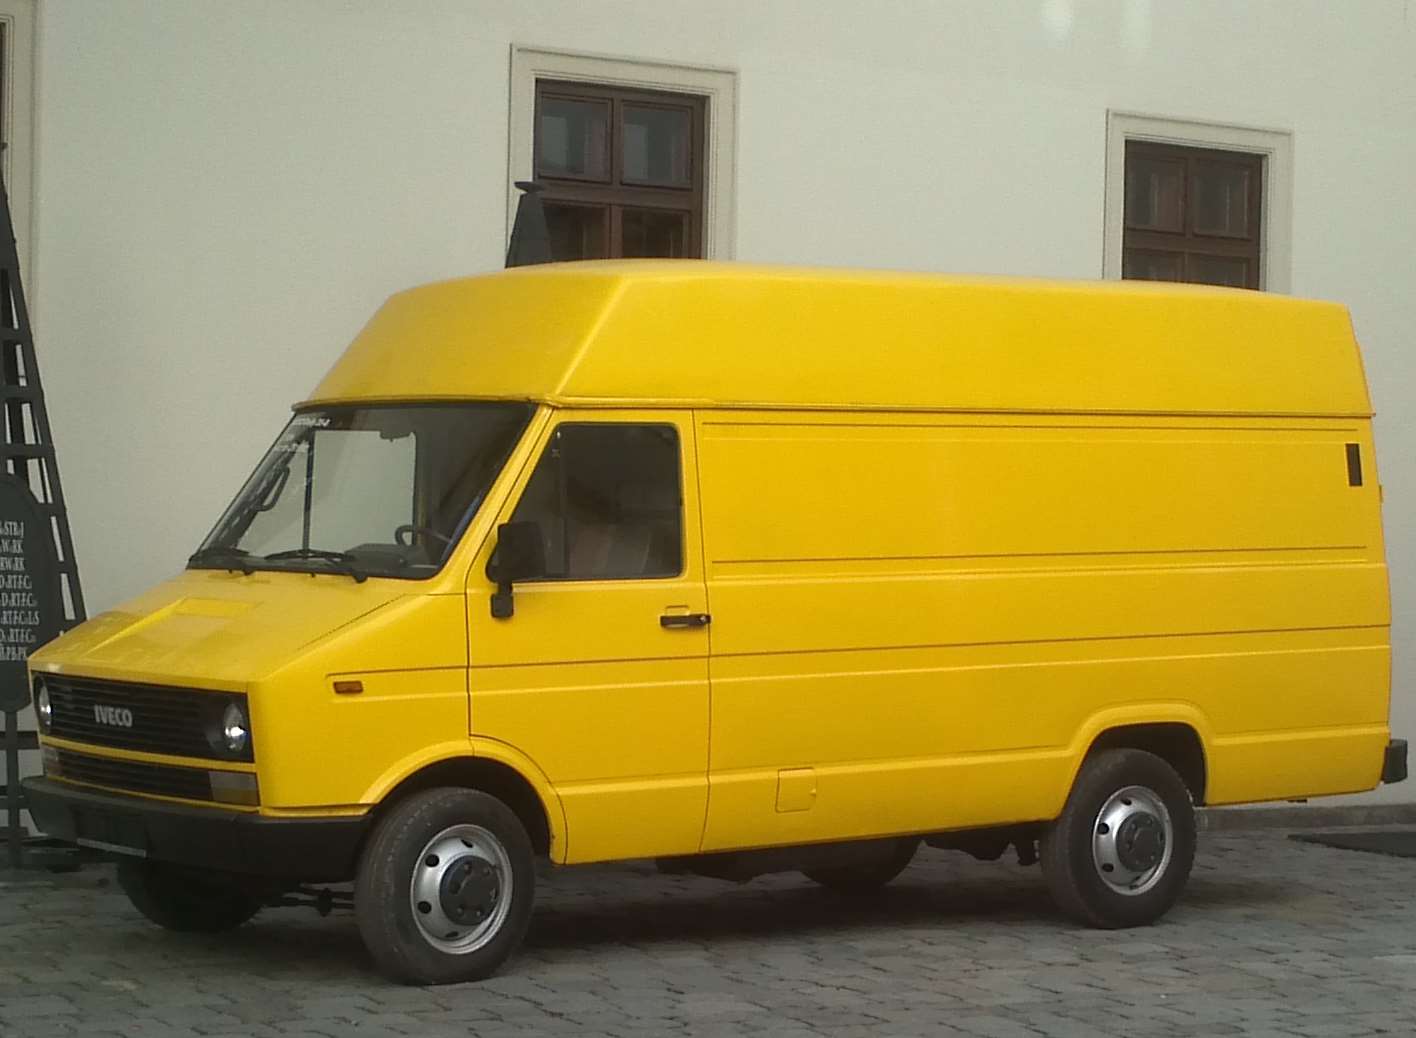 An Iveco van. Picture: Wikipedia